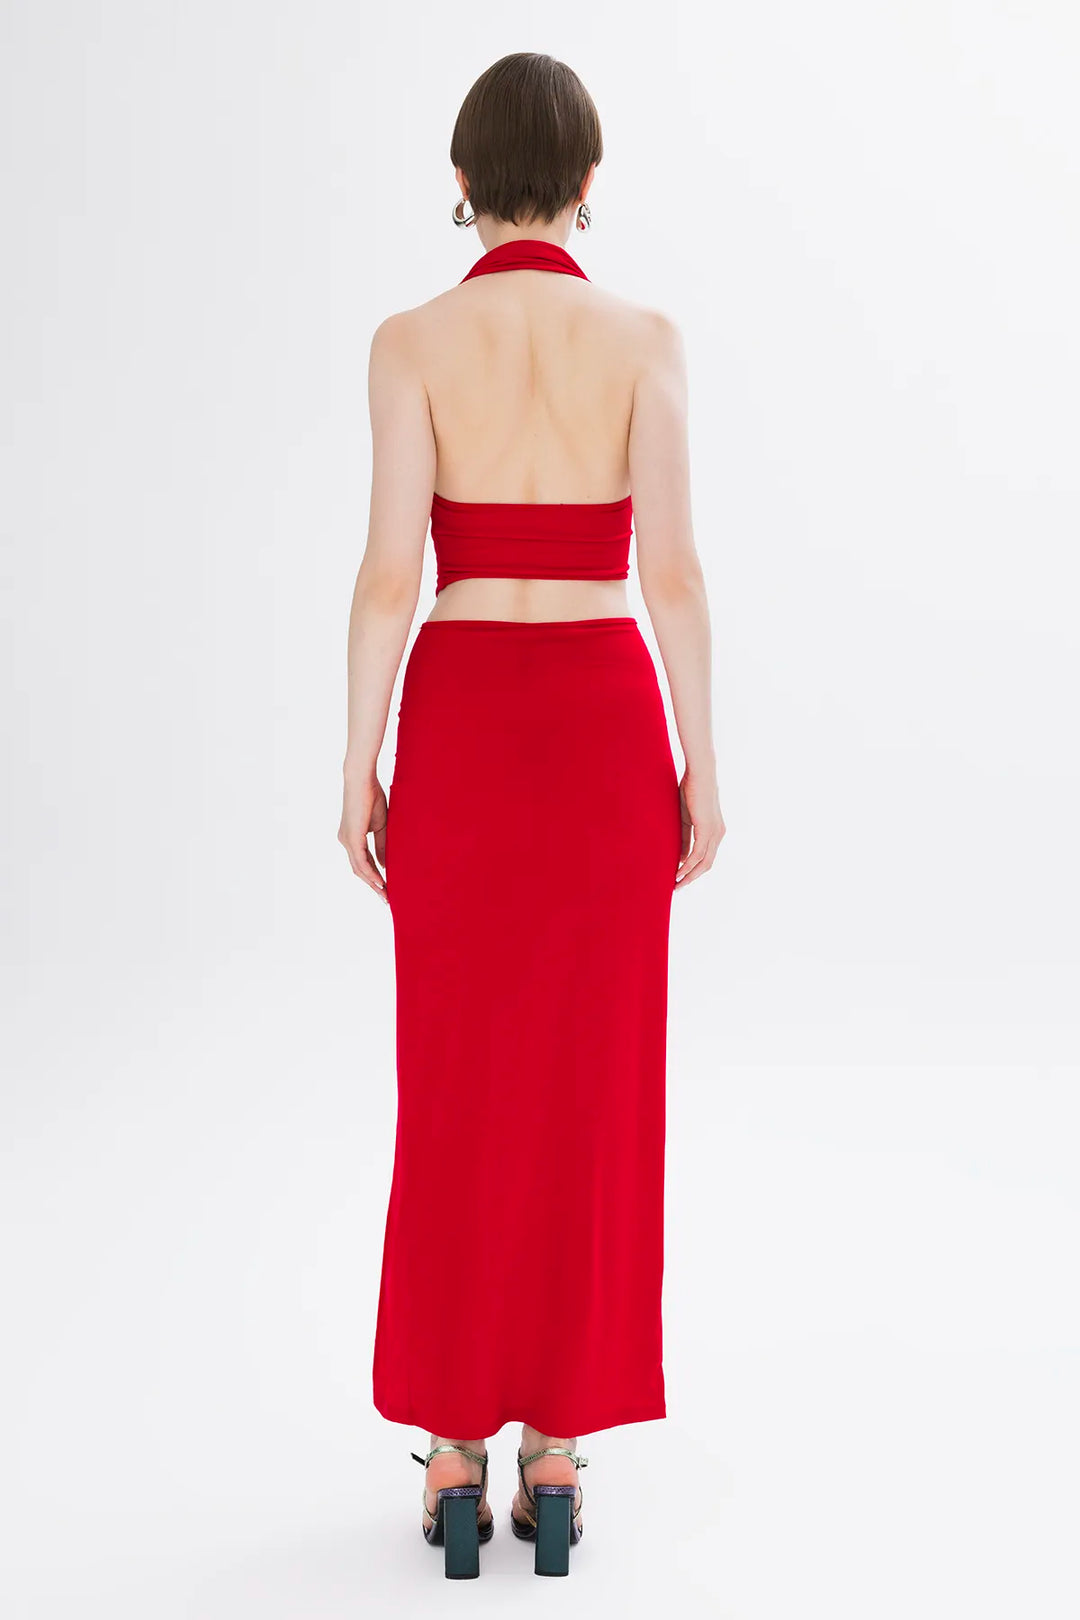 Scarlet Red Maxi Dress